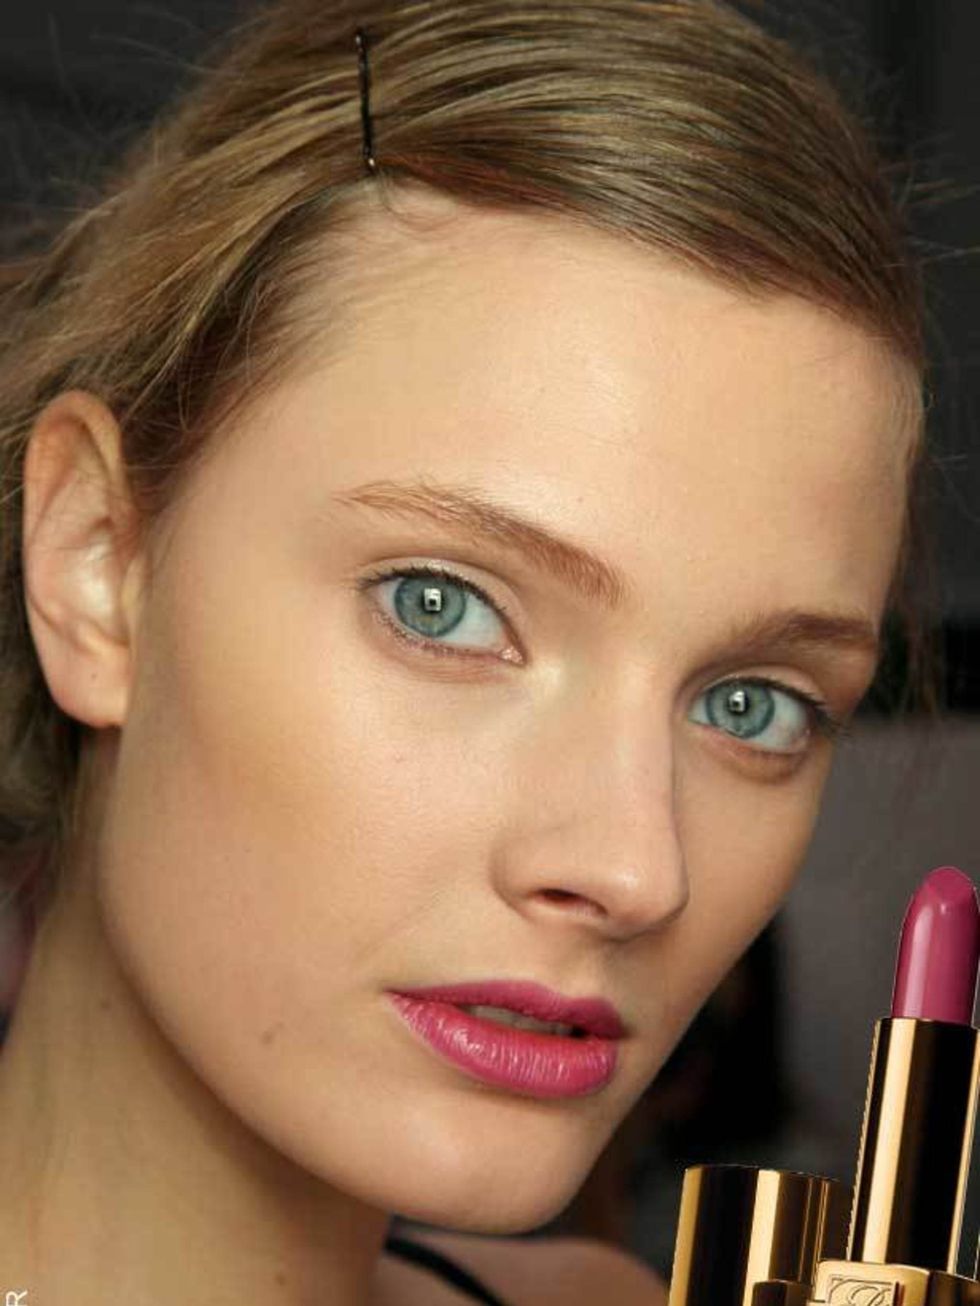 <p>ELLE loves this rich, pink berry lip. Slick on Estee Lauder's Pure Color Lipstick in Raspberry, £18.50 (<a href="http://www.esteelauder.co.uk/">Estee Lauder</a>). A dusting of bronzer and a slick of mascara will complete the look.</p><p><a href="http:/